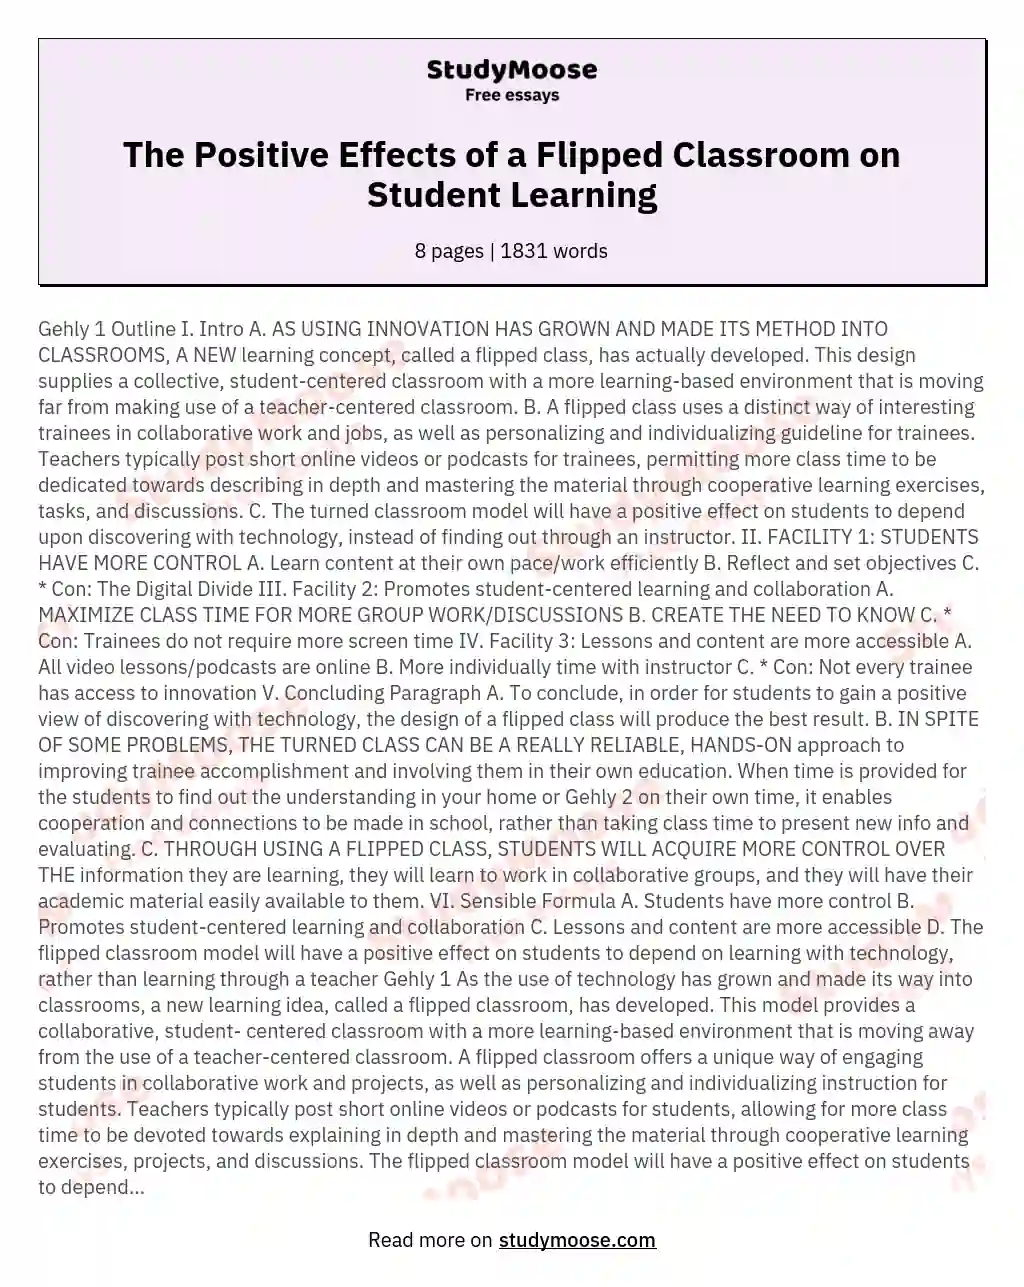 The Positive Effects of a Flipped Classroom on Student Learning essay